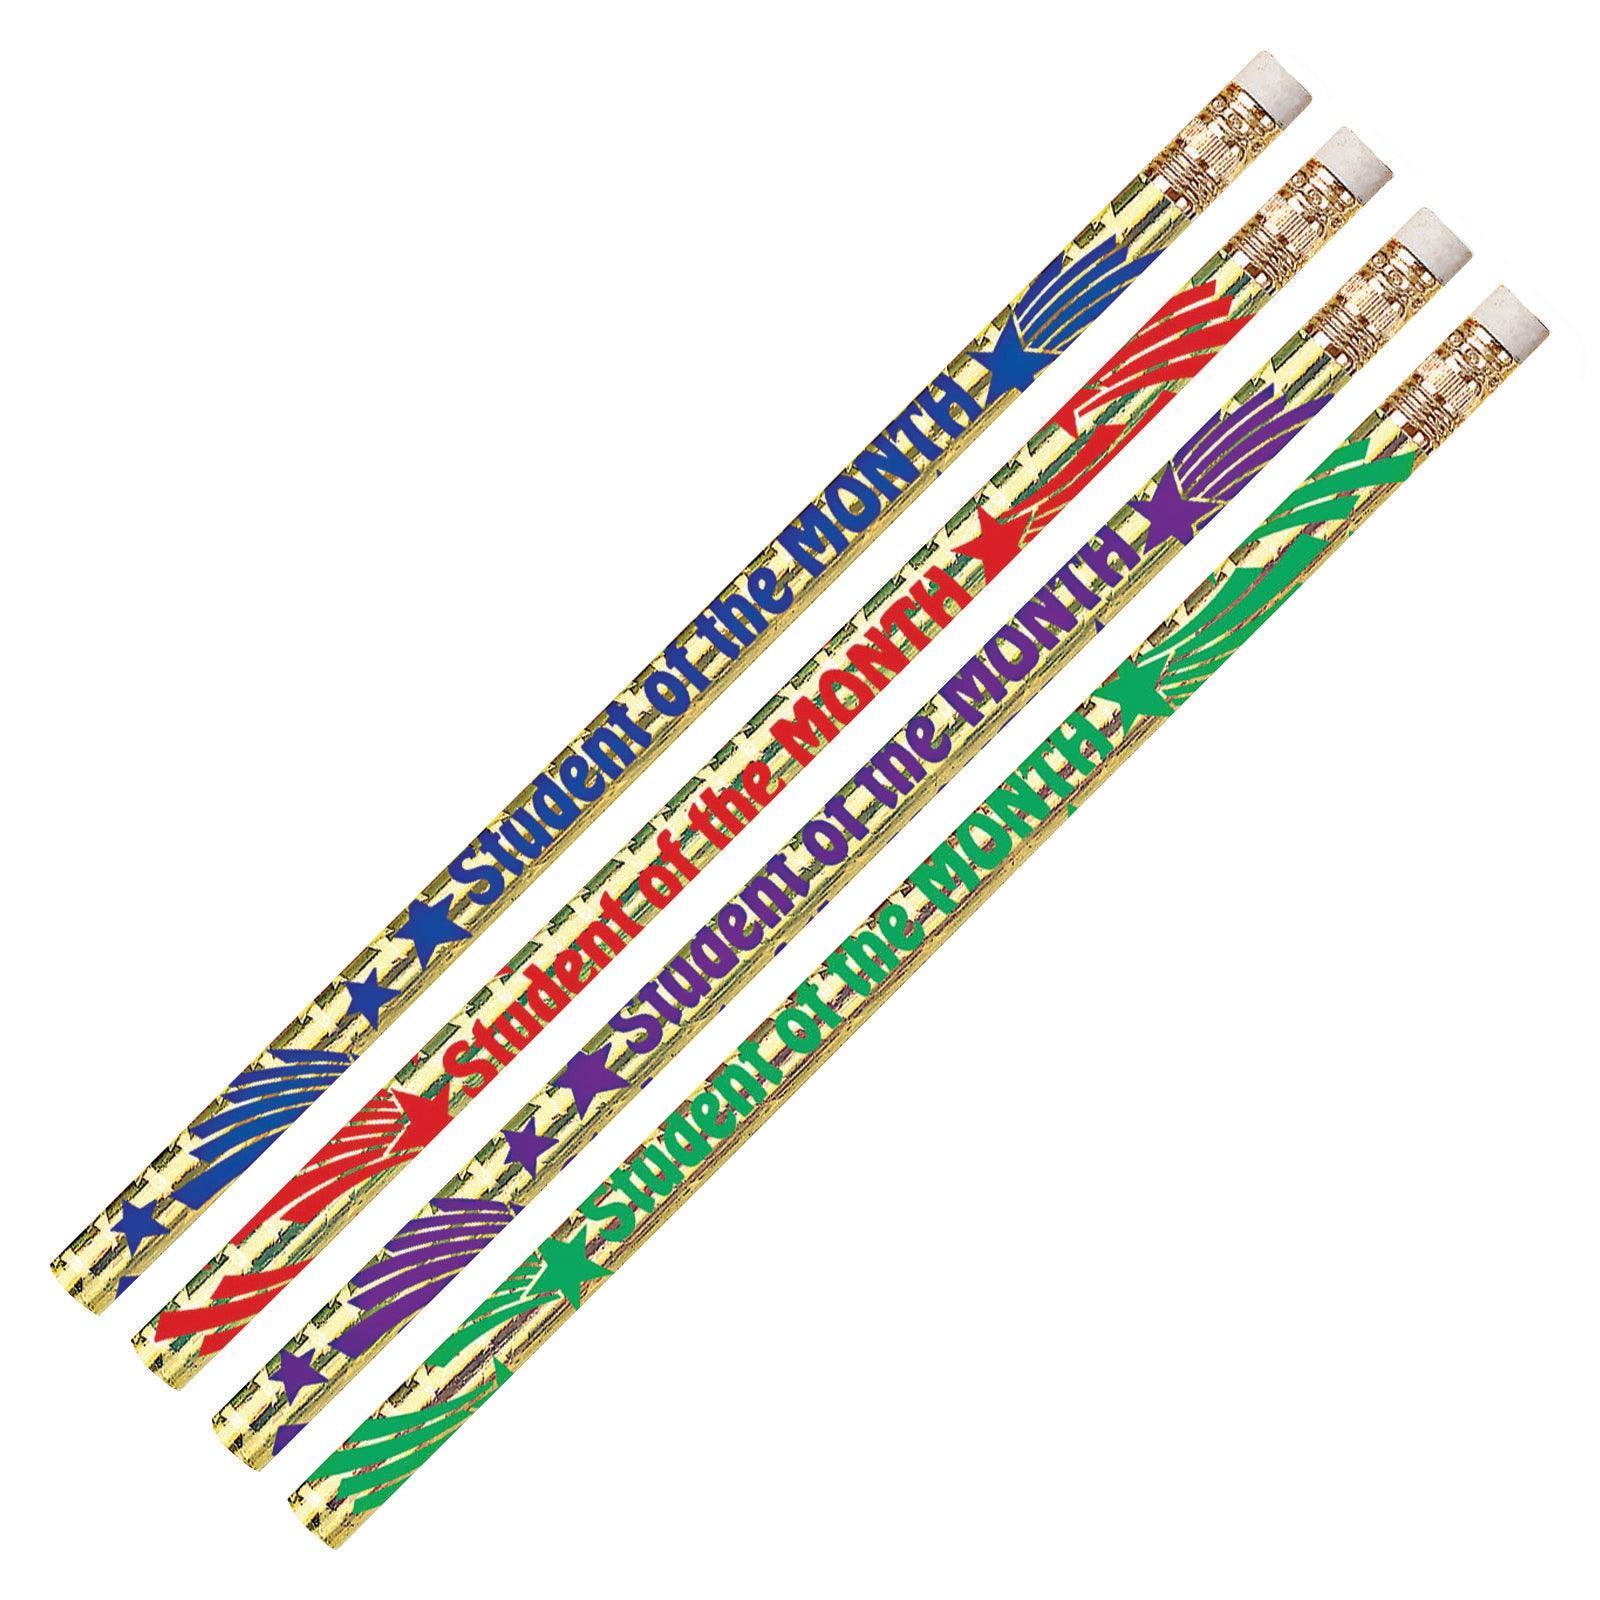 Student of the Month Motivational Pencils, 12 Per Pack, 12 Packs - Loomini